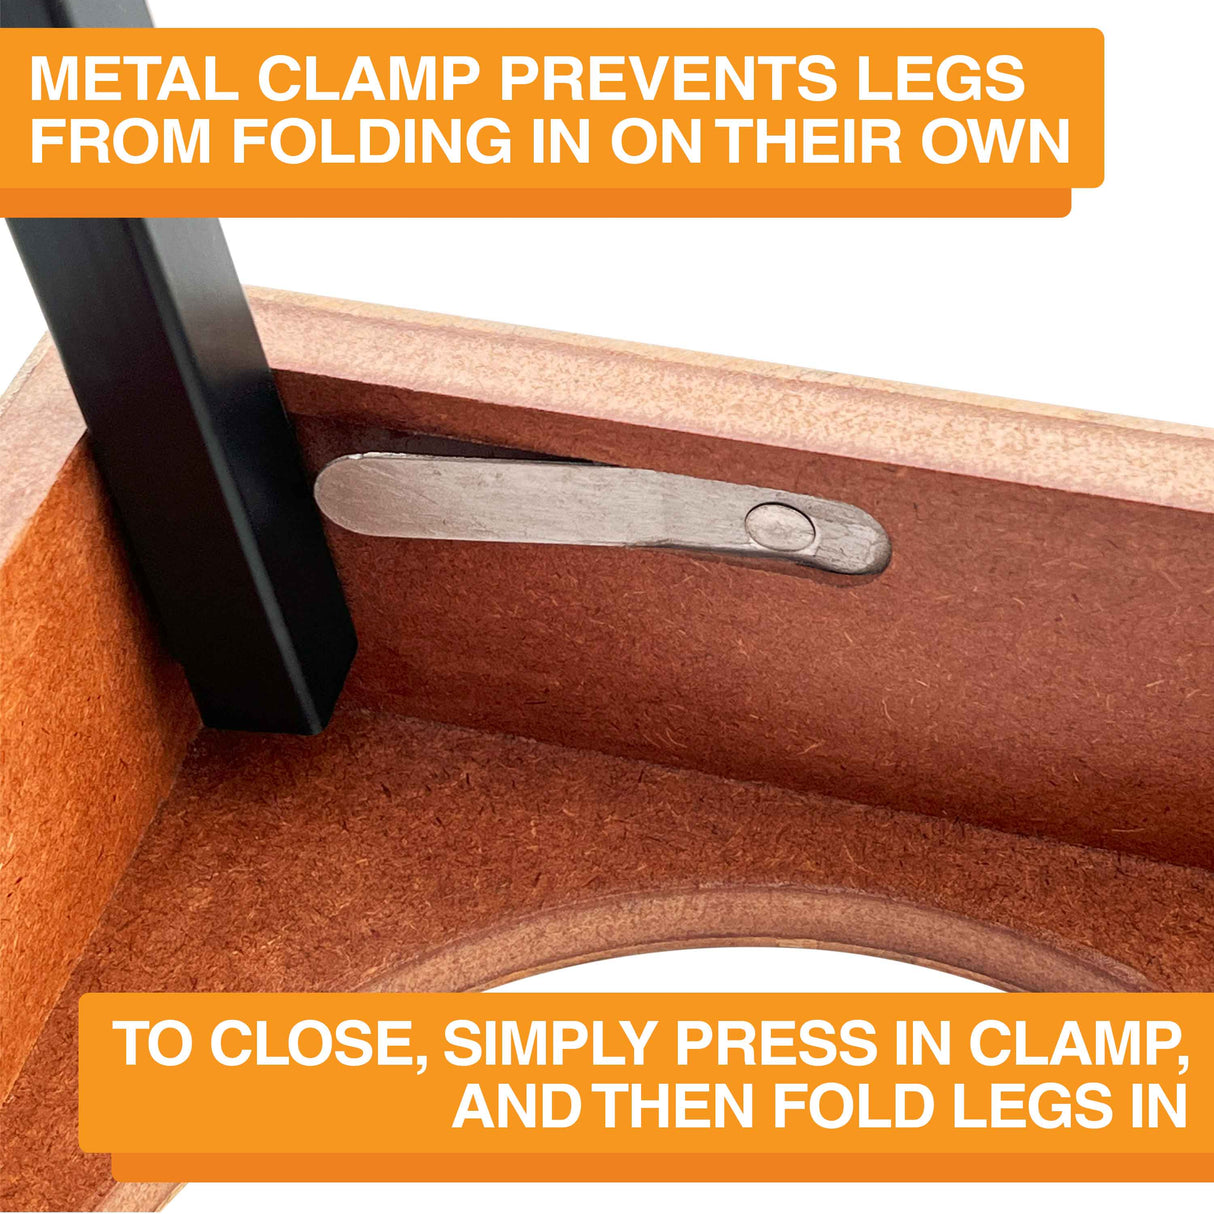 Clamps prevent legs from folding in on their own - press in clamp to release